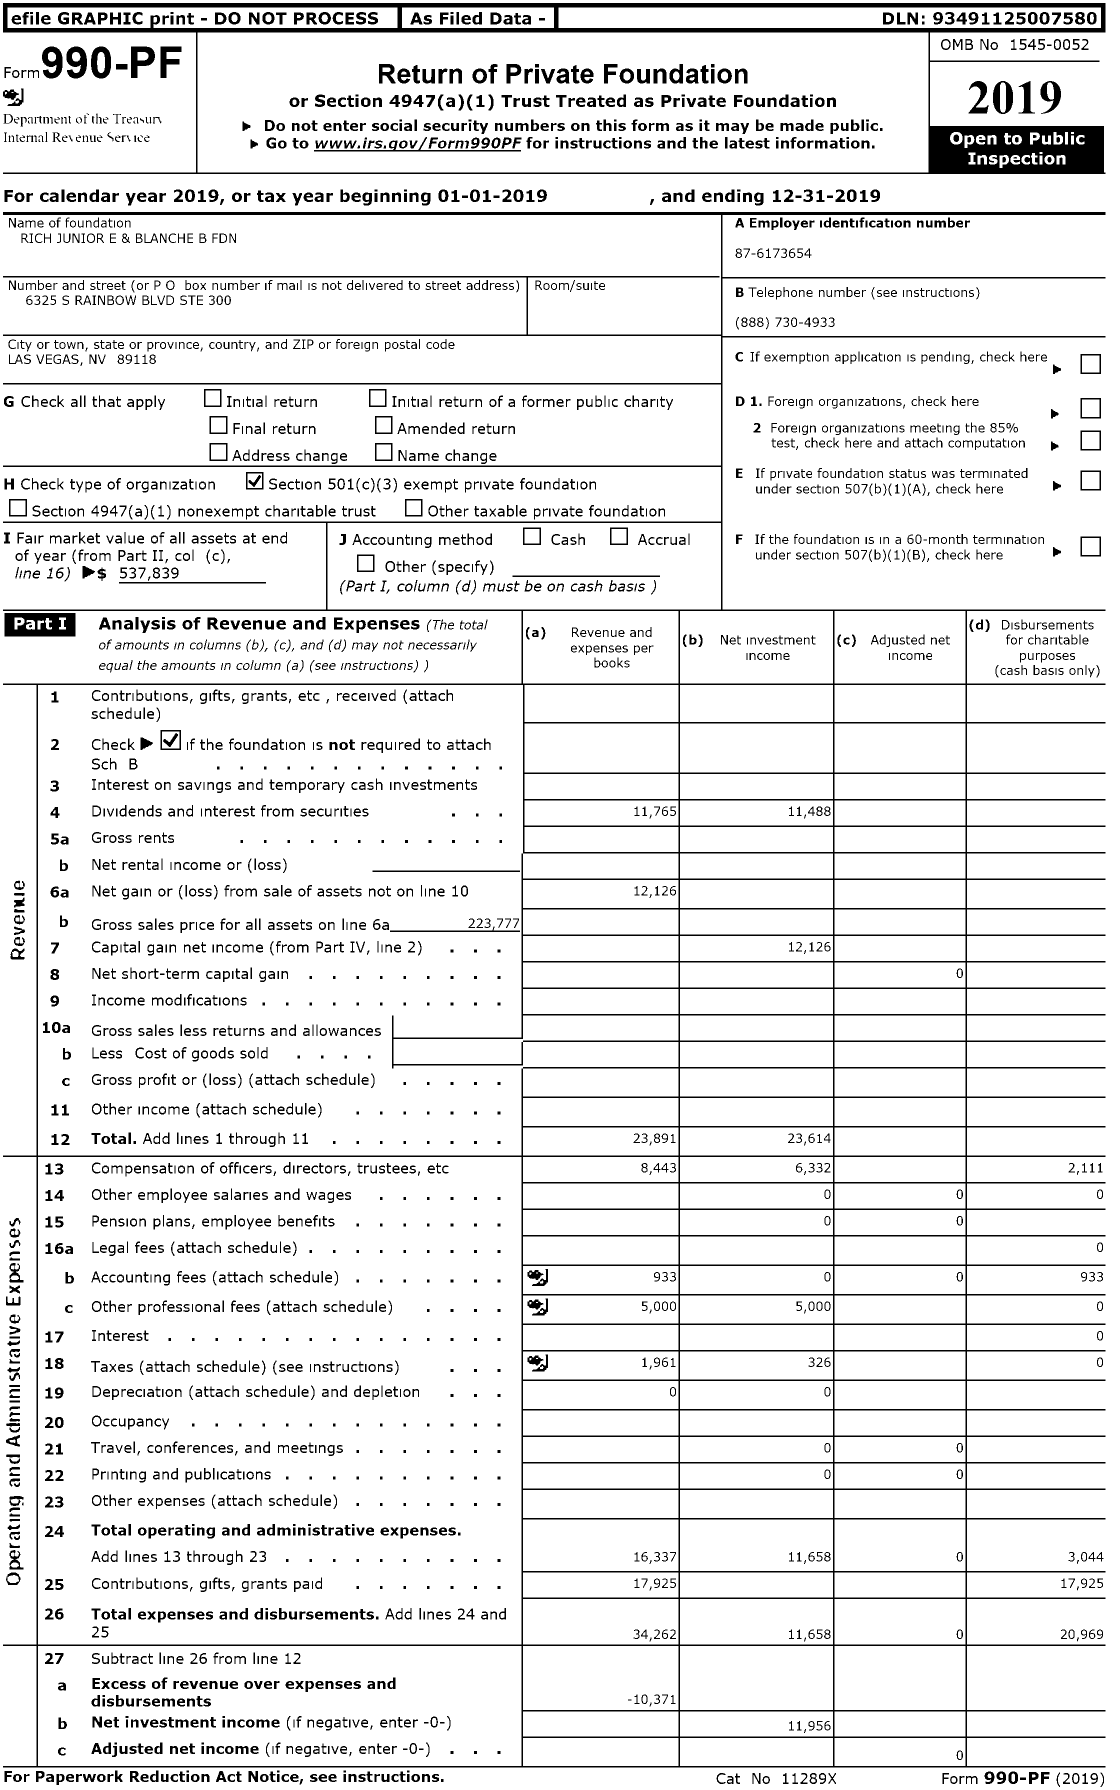 Image of first page of 2019 Form 990PR for Rich Junior E and Blanche B Foundation